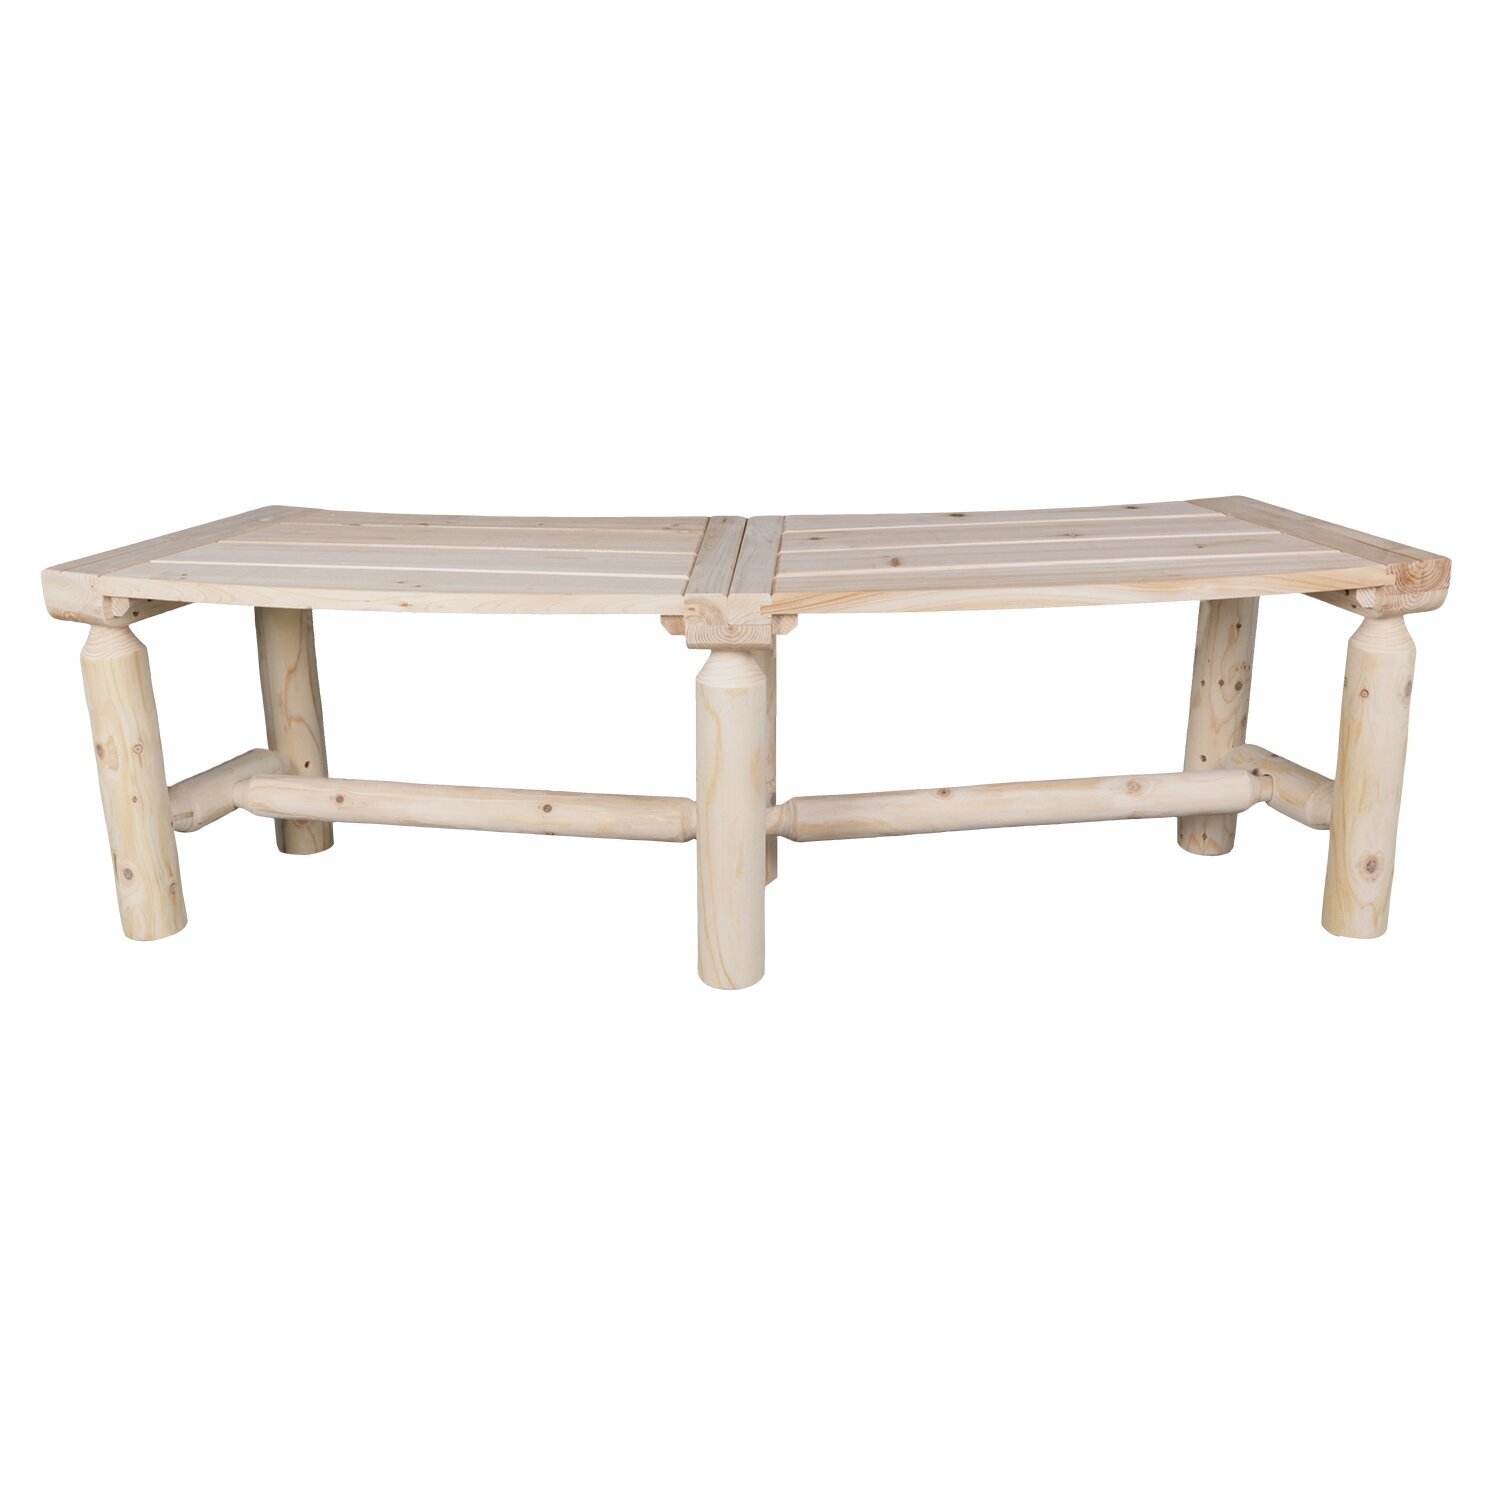 Curved Rustic Wooden Outdoor Bench